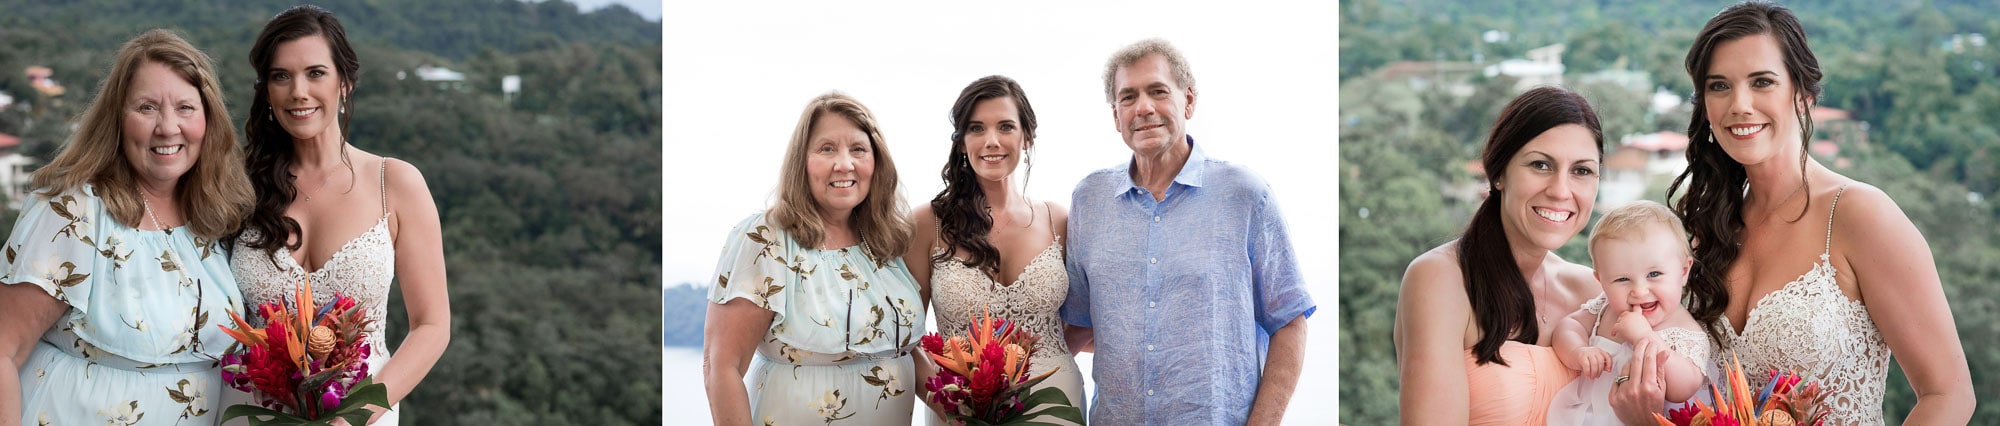 The bride and her family